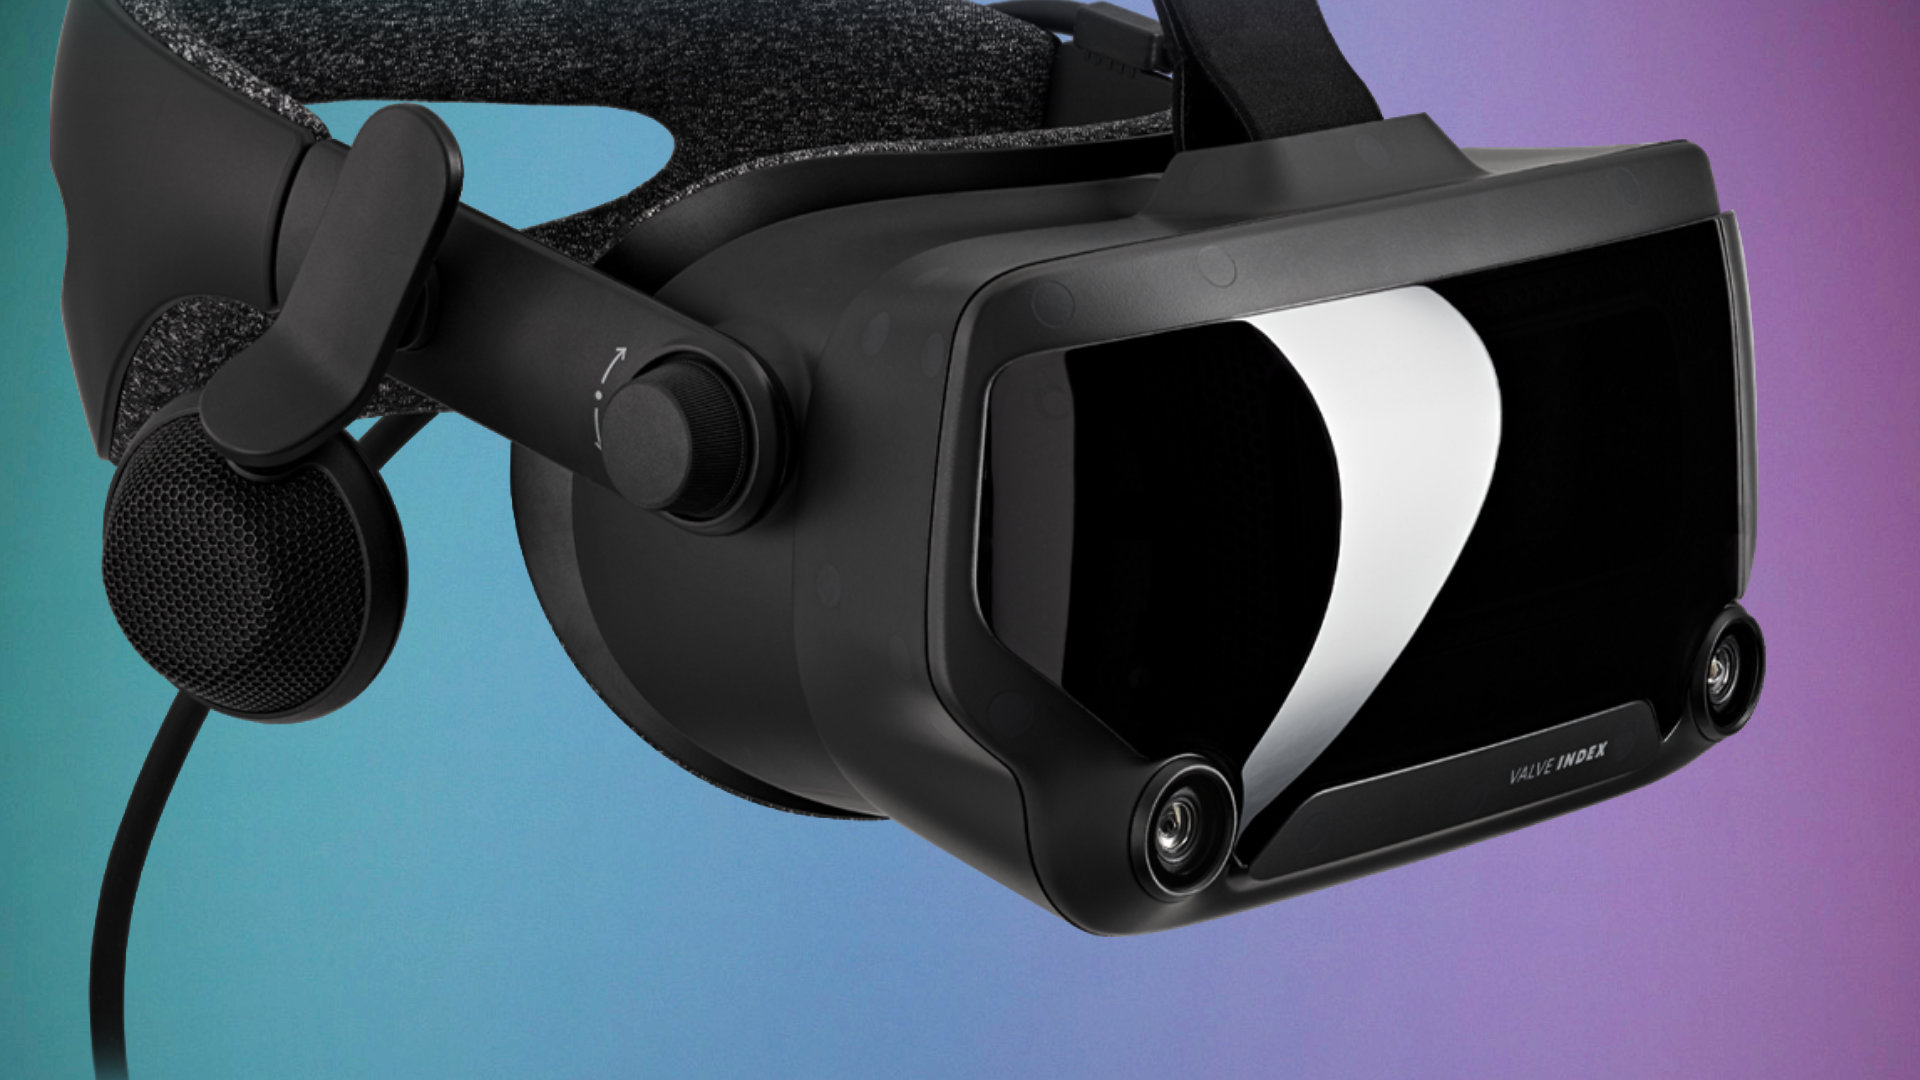 Valve Index 2 VR headset could rival the Meta Quest 3 in tracking